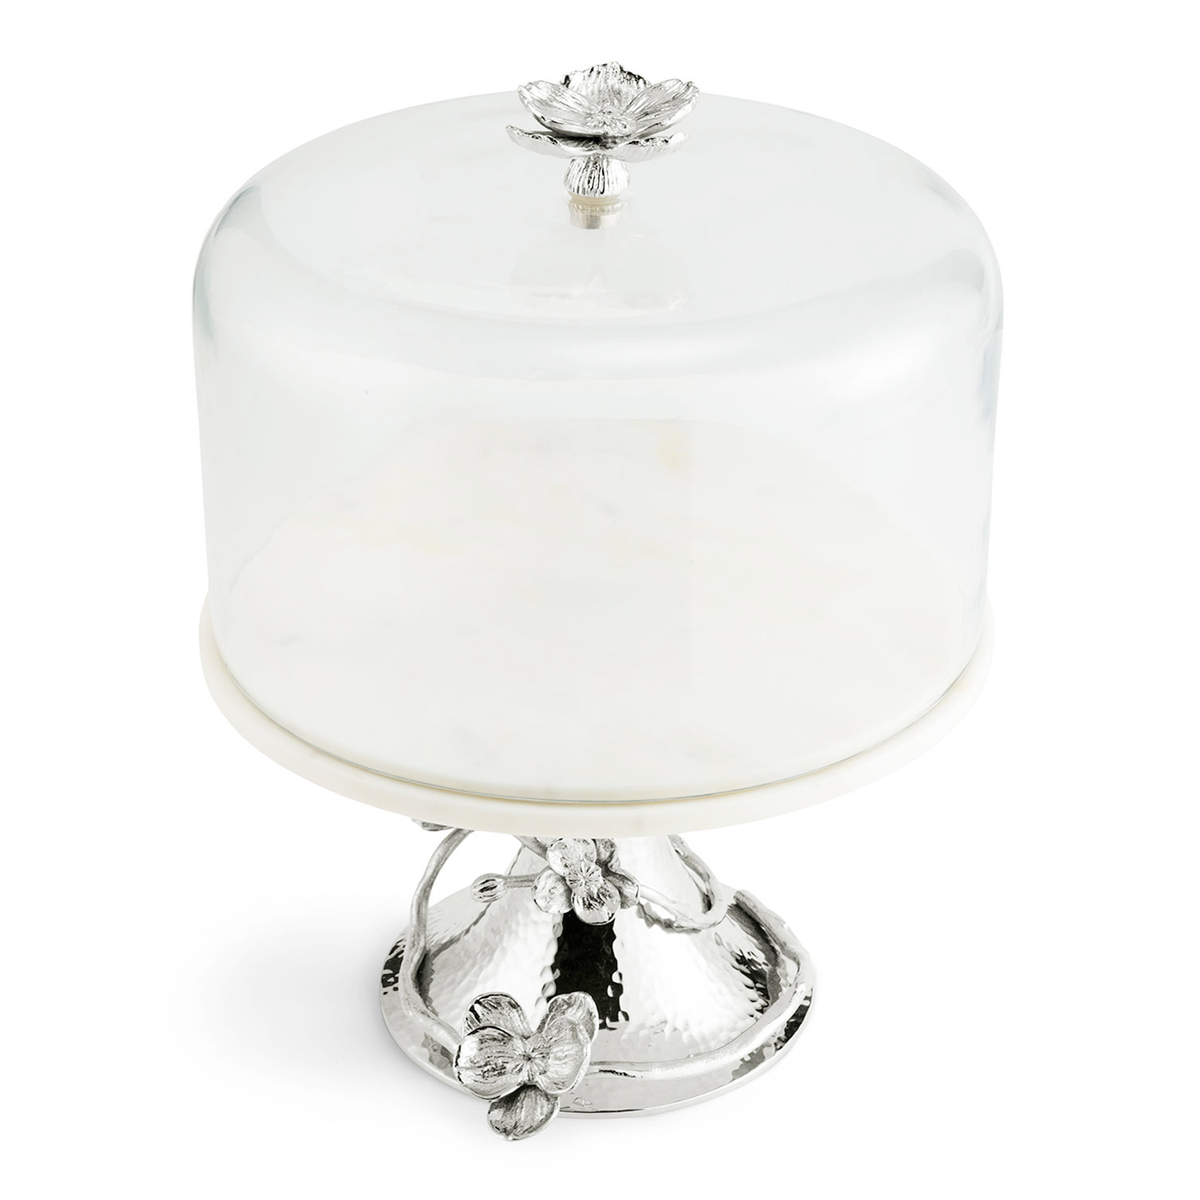 White Orchid Cake Stand wtih Dome, Michael Aram - RSVP Style